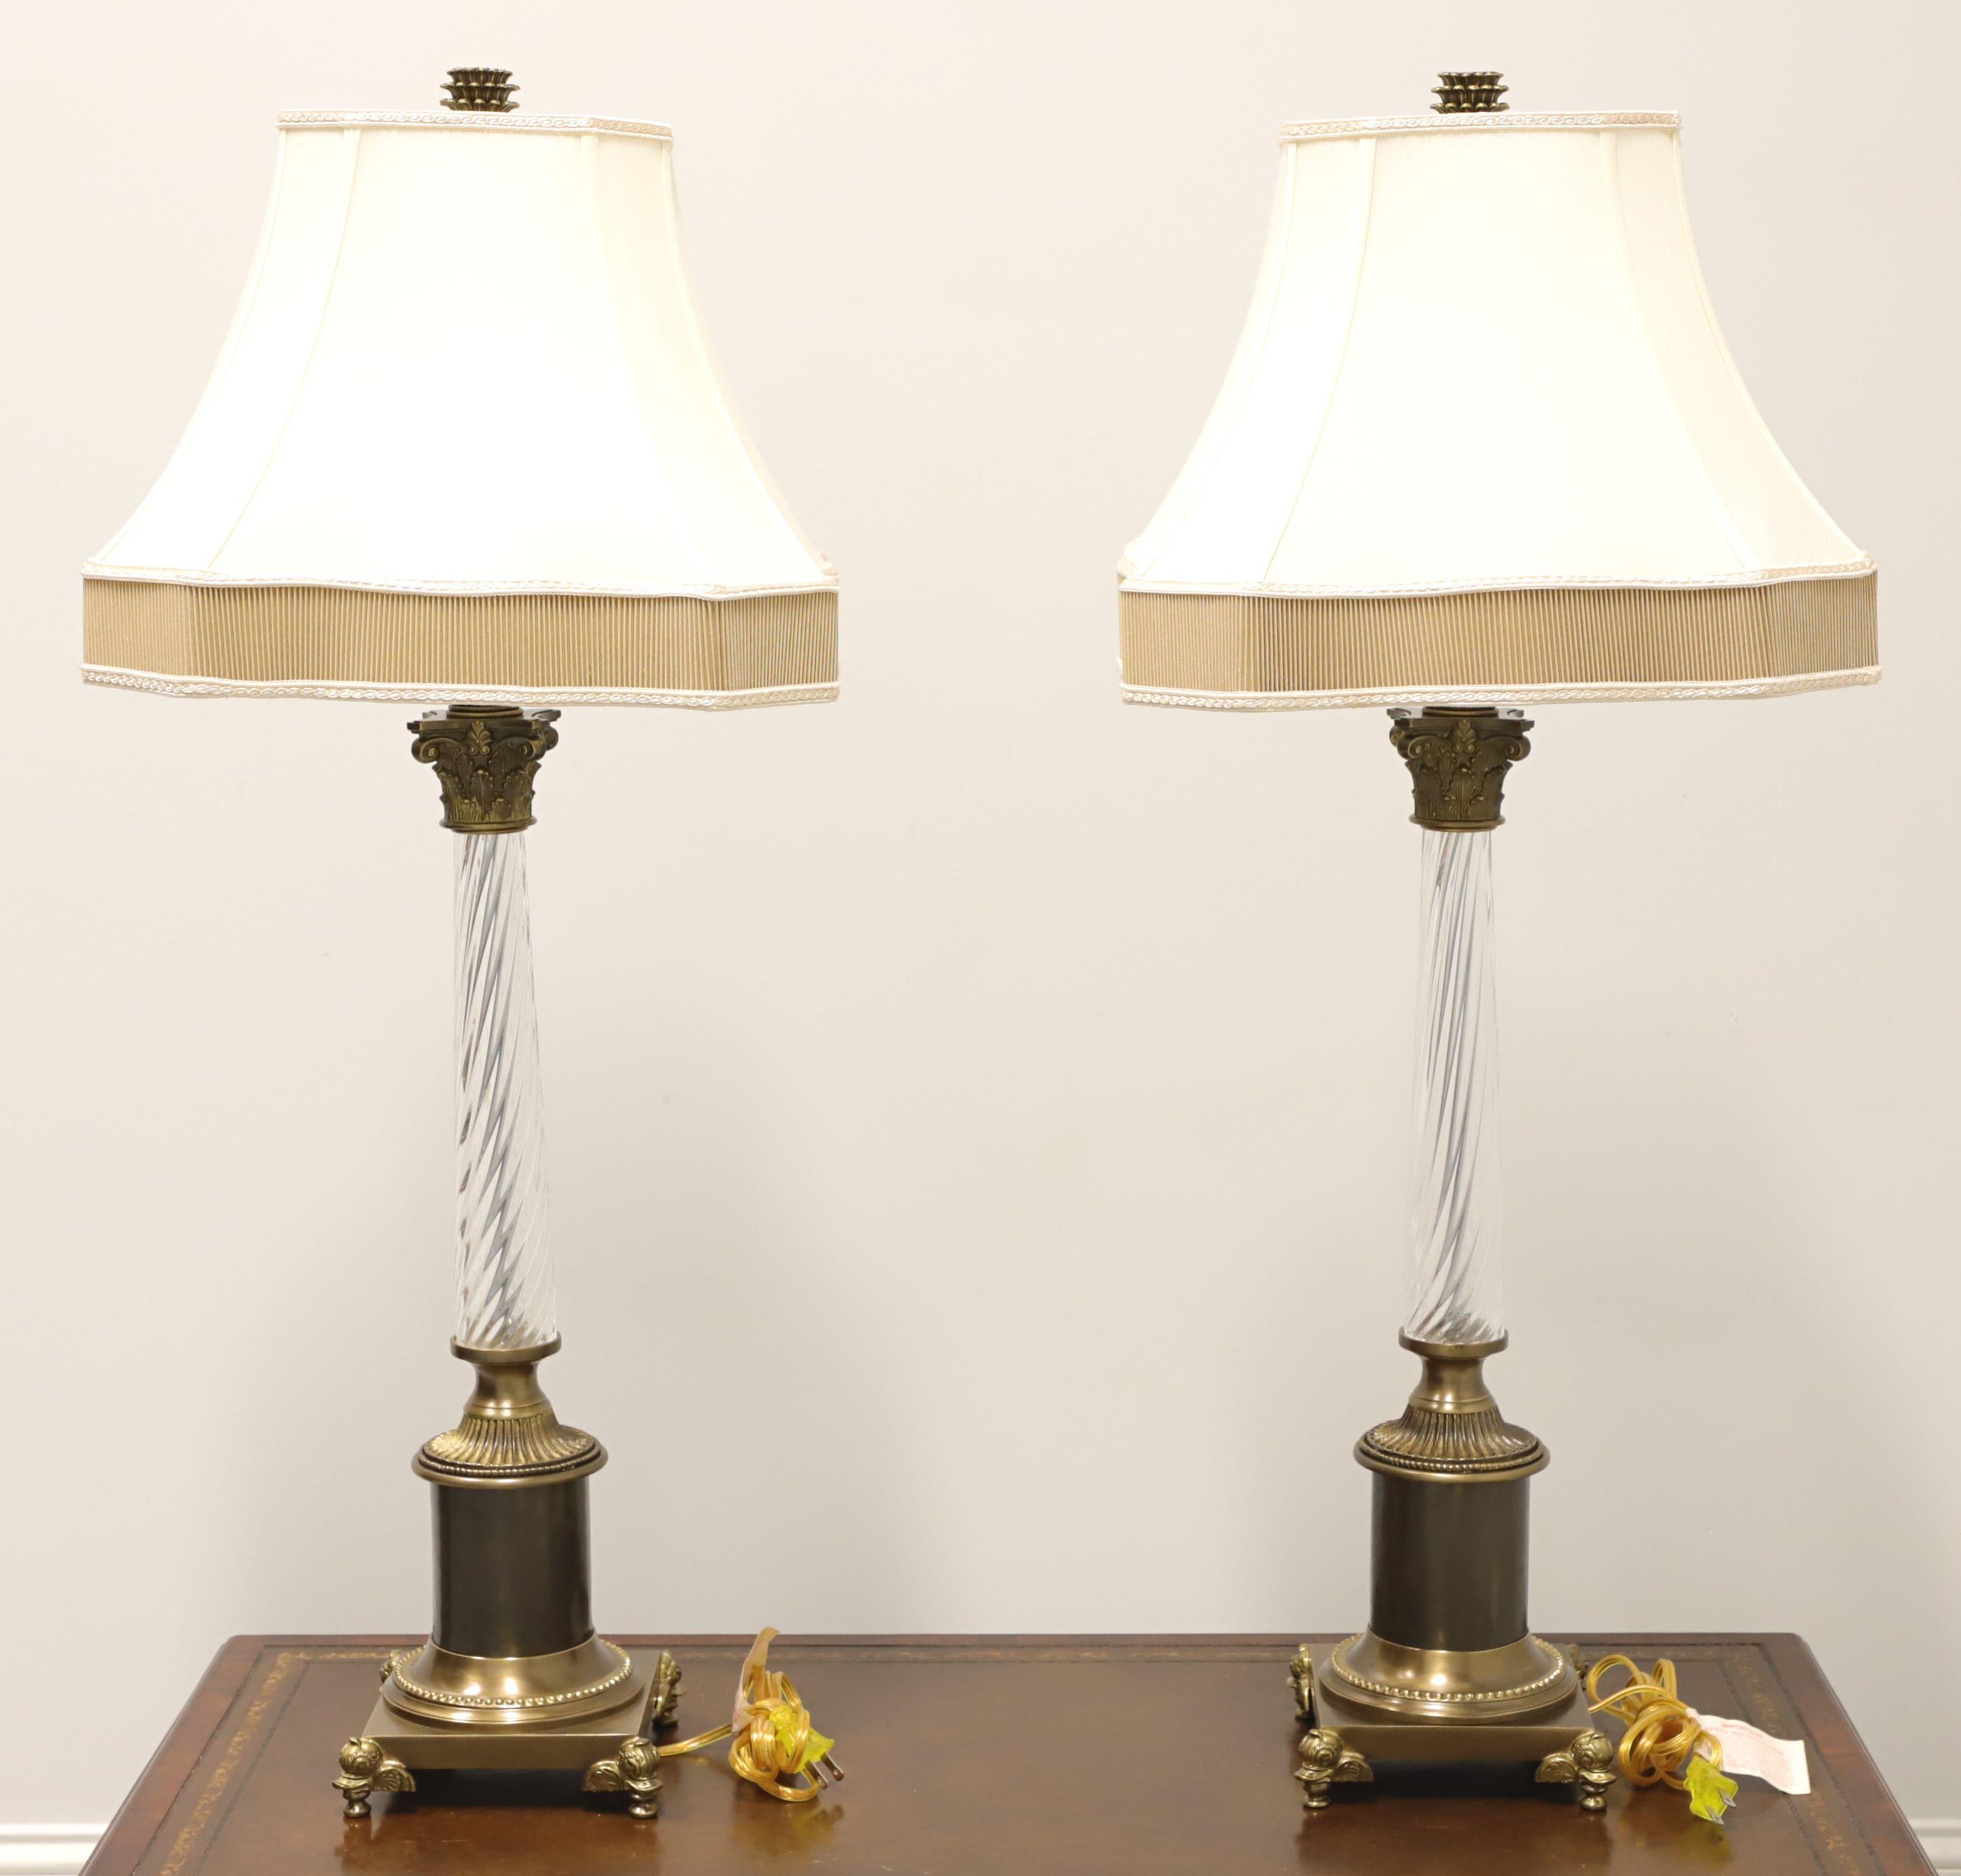 American CHELSEA HOUSE Brass & Glass Traditional Table Lamps with Duckhead Feet - Pair